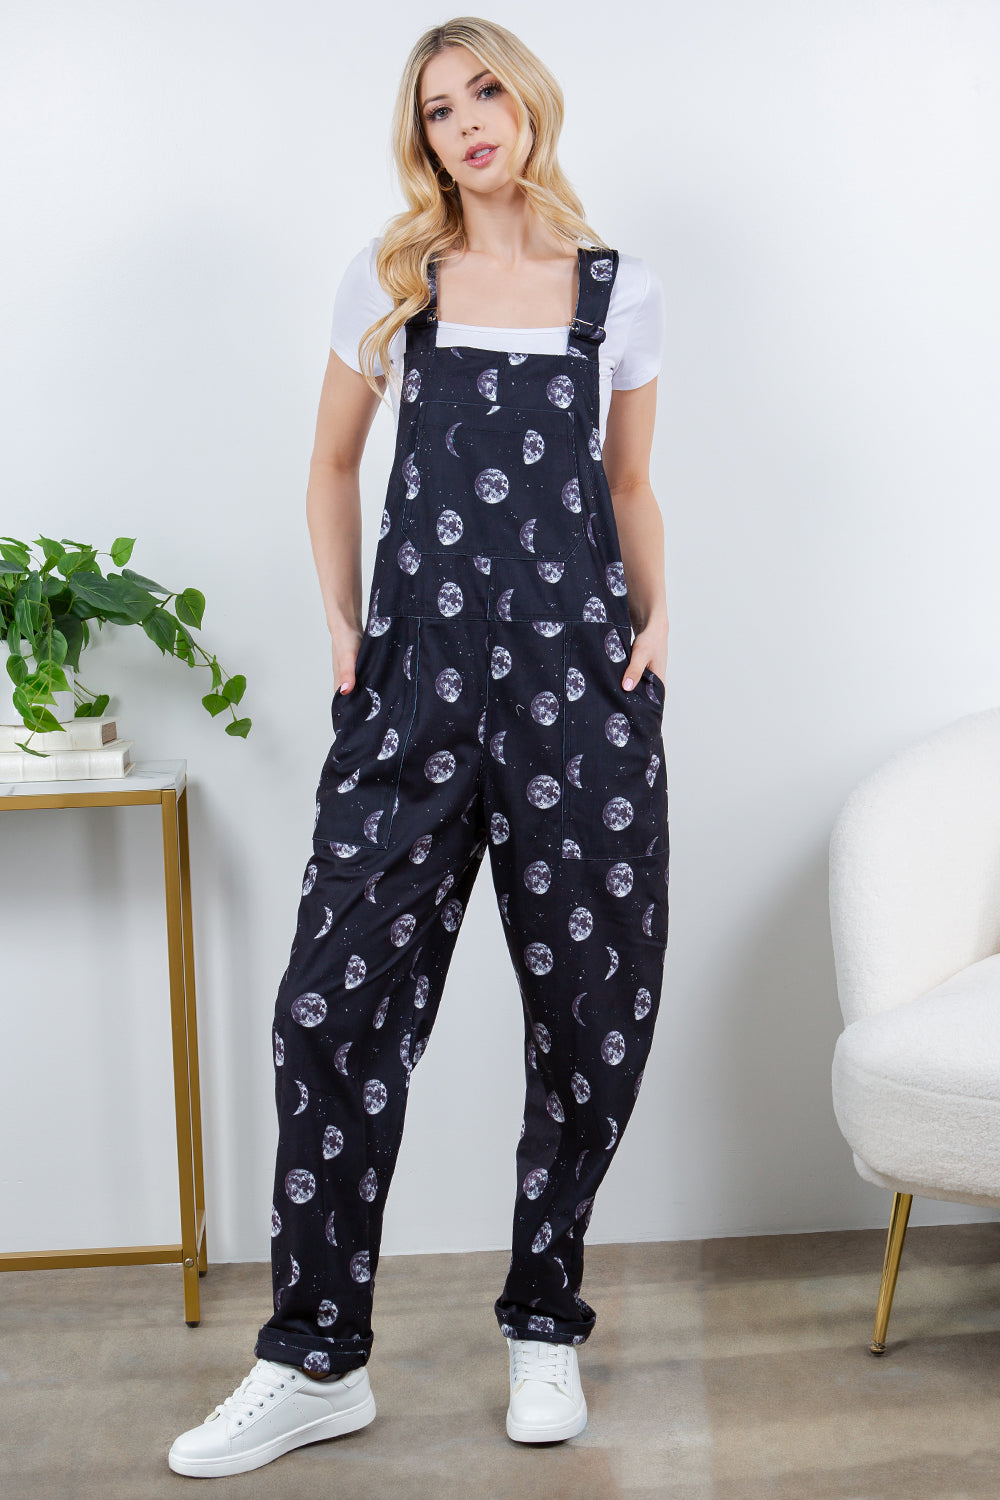 Phases of Moon Overall Jumpsuit